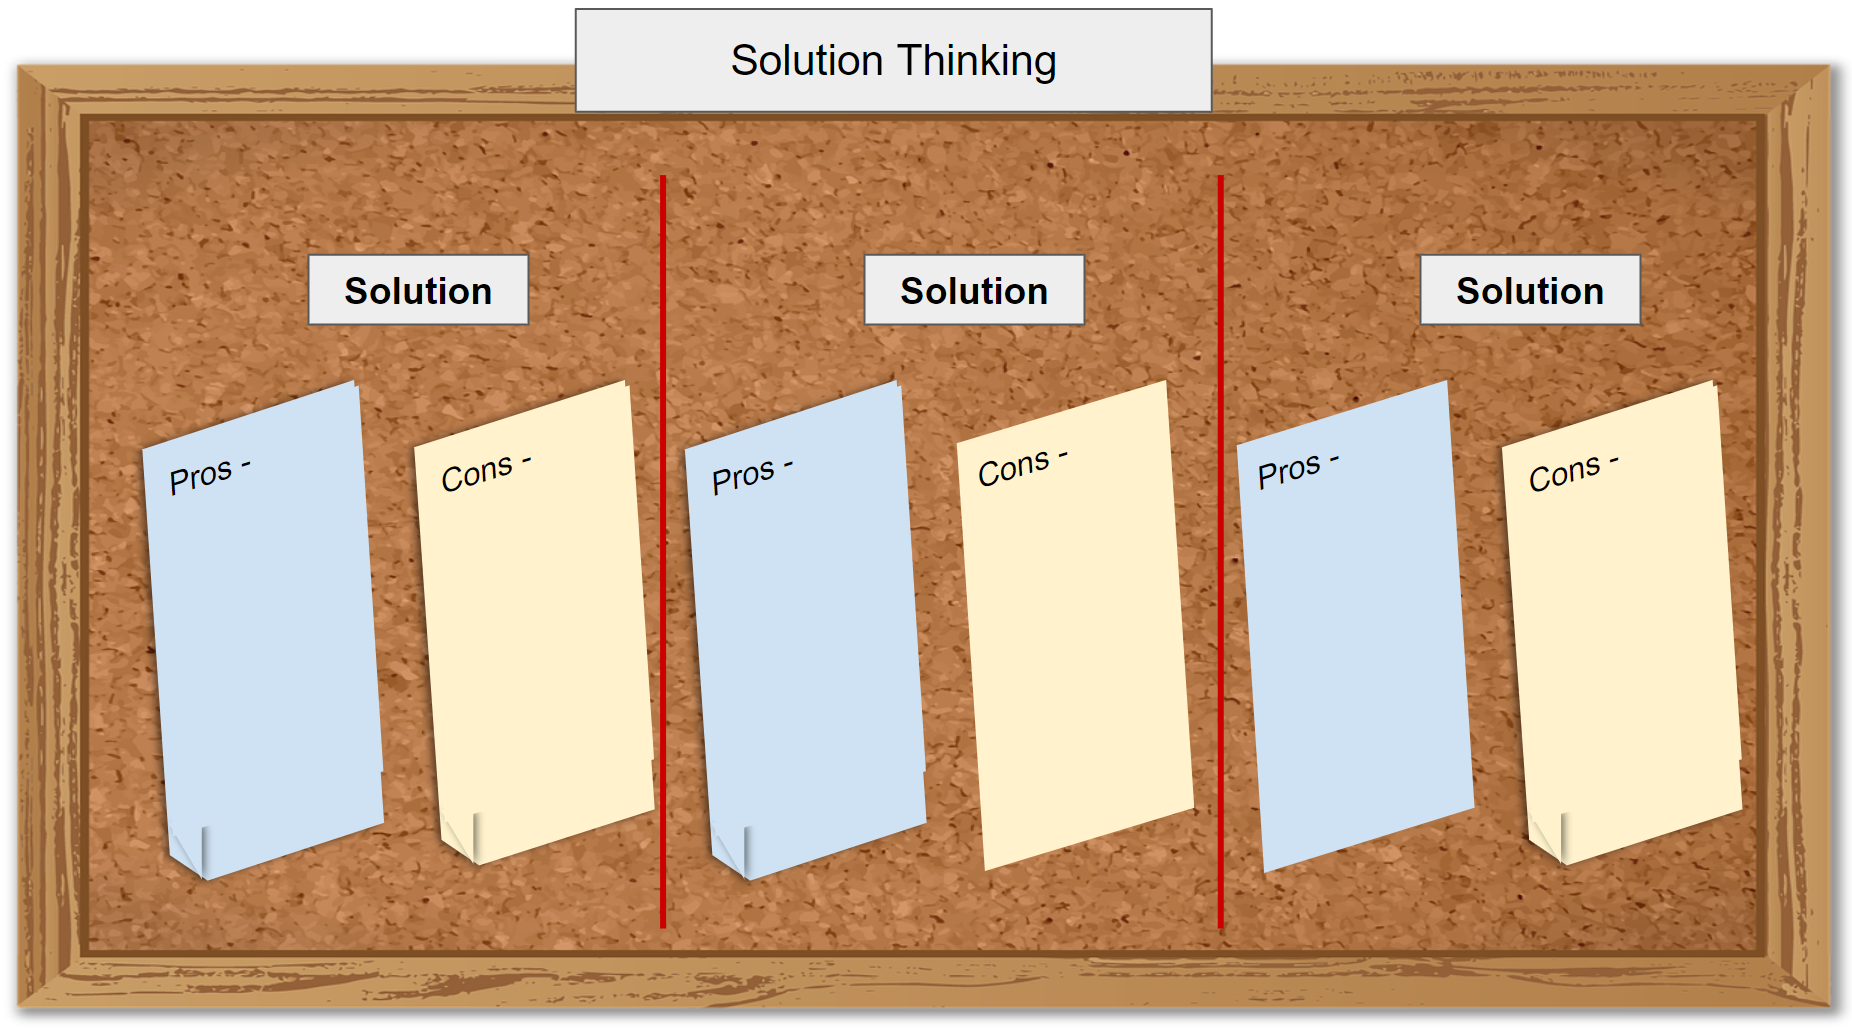 Brainstorm solutions. List pros and cons of each.